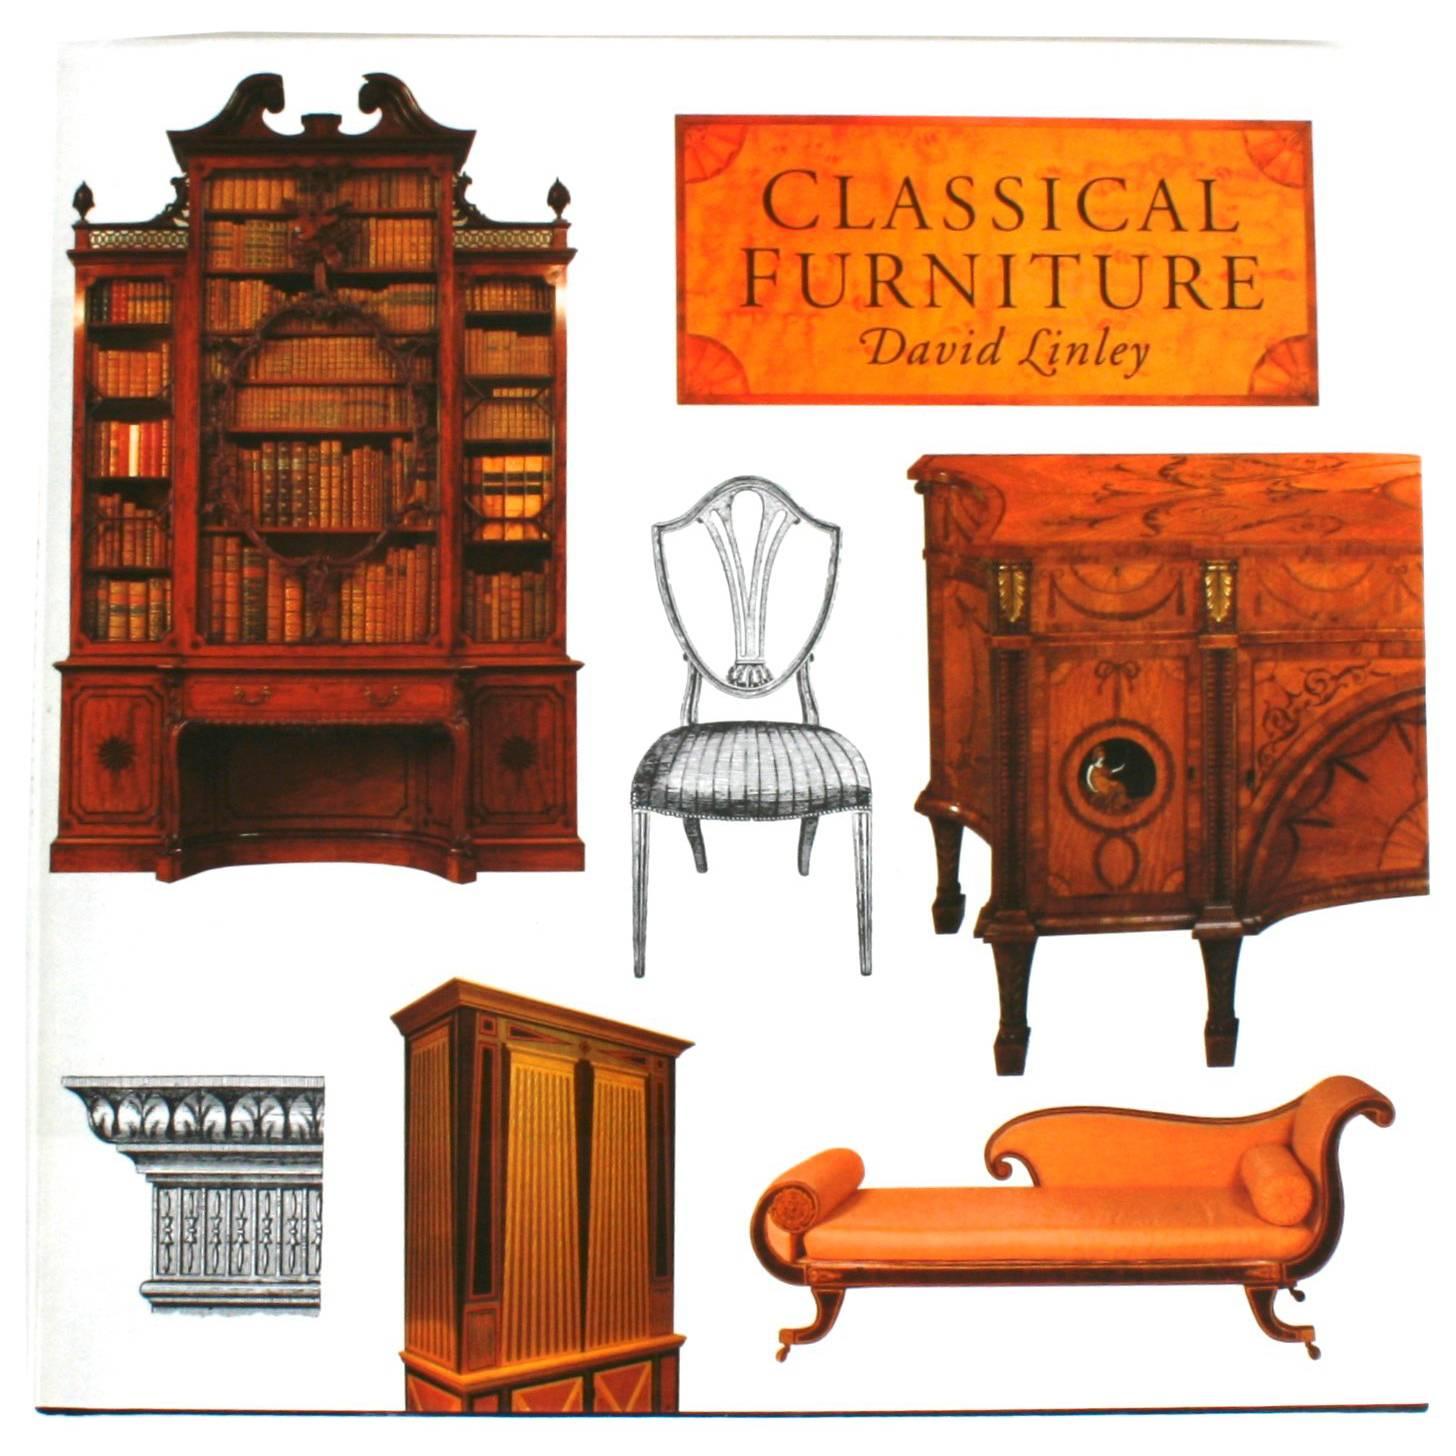 Classical Furniture by David Linley, 1st Edition